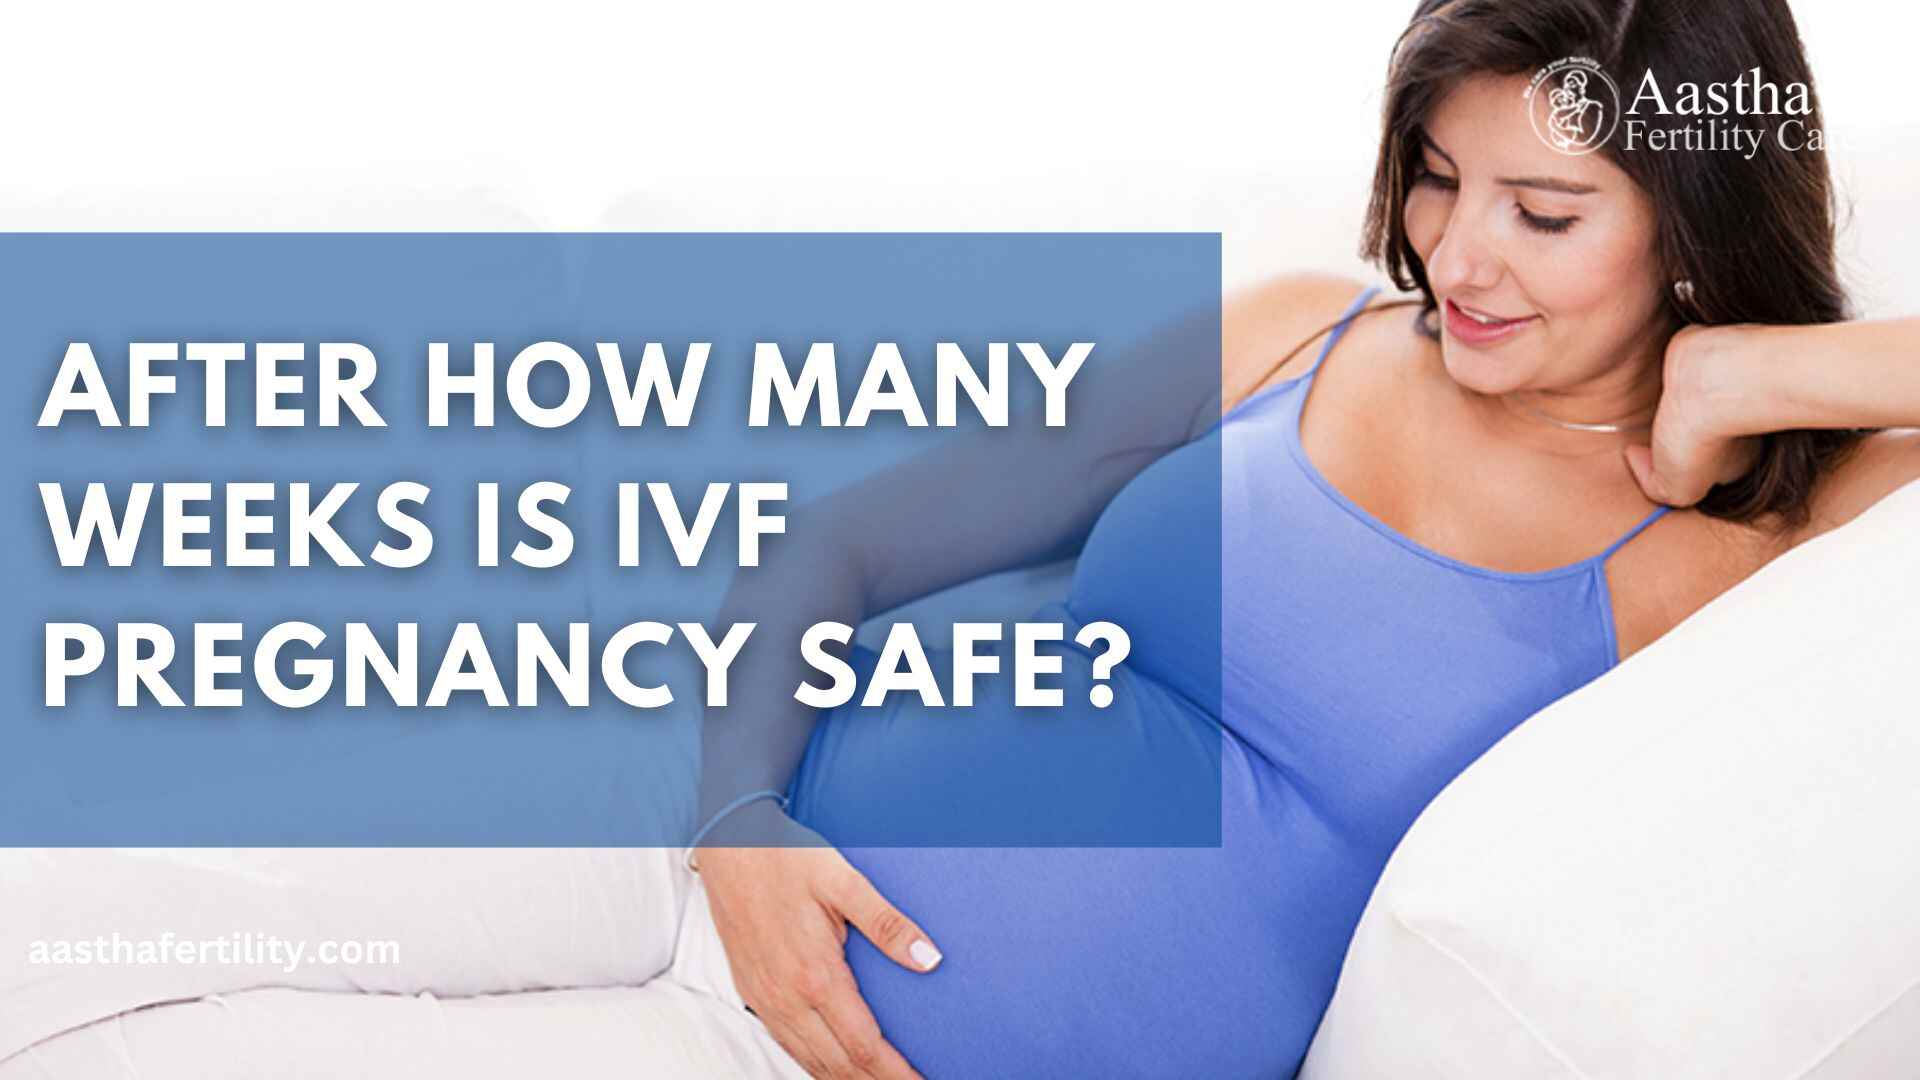 After How Many Weeks Is IVF Pregnancy Safe?